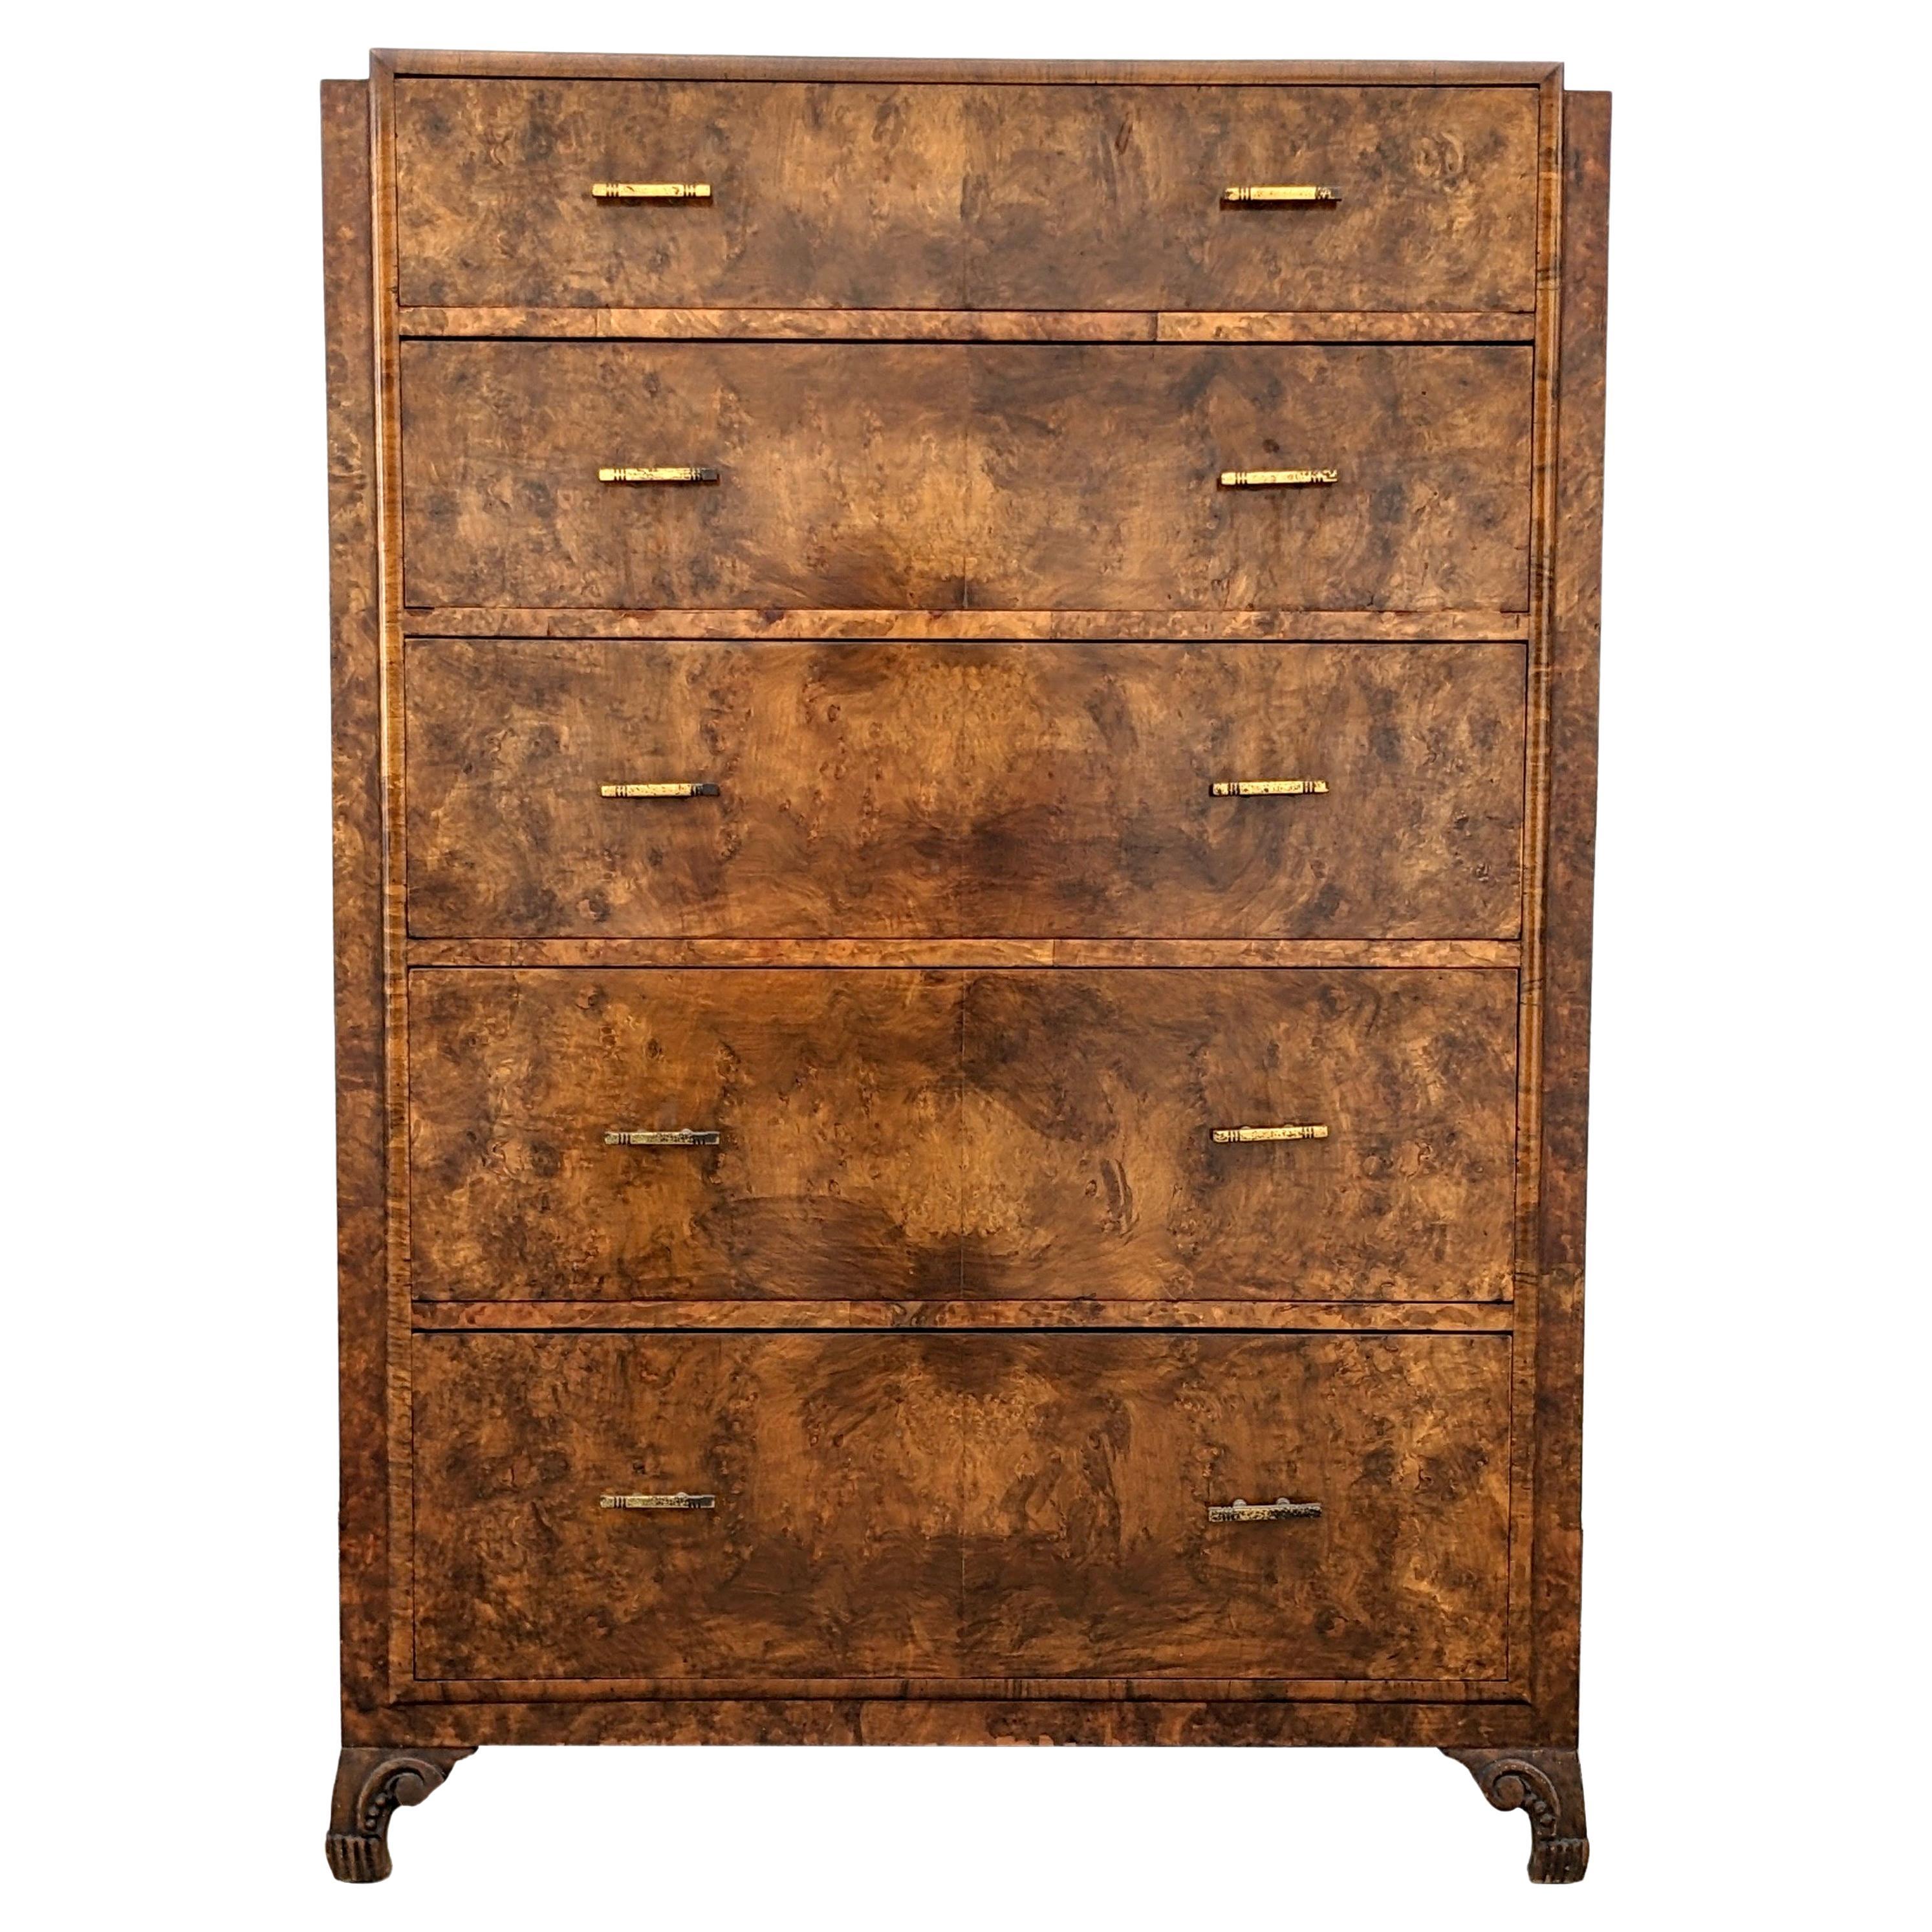 Art Deco High Quality Burr Walnut Chest Of Five Drawers, English, c1930's